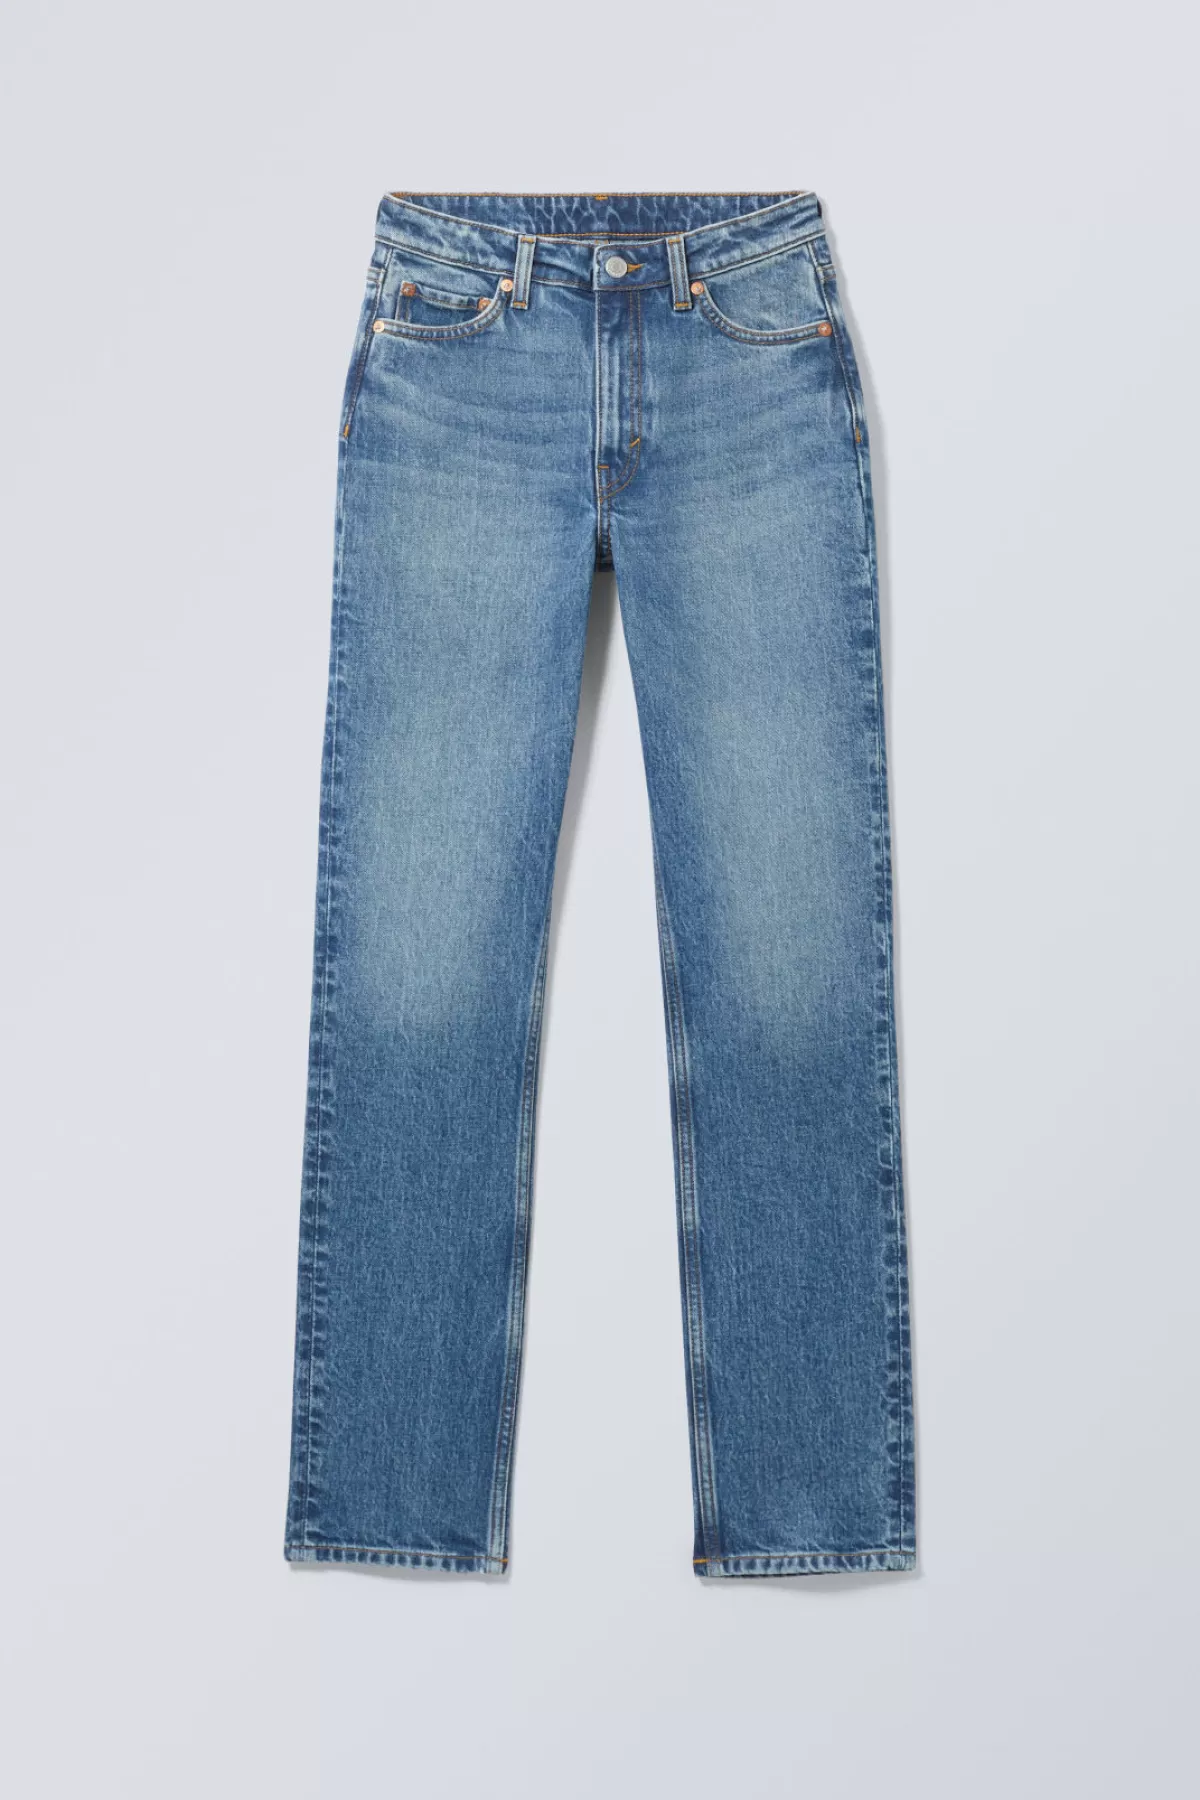 Weekday Smooth High Slim Jeans Golf Blue Outlet